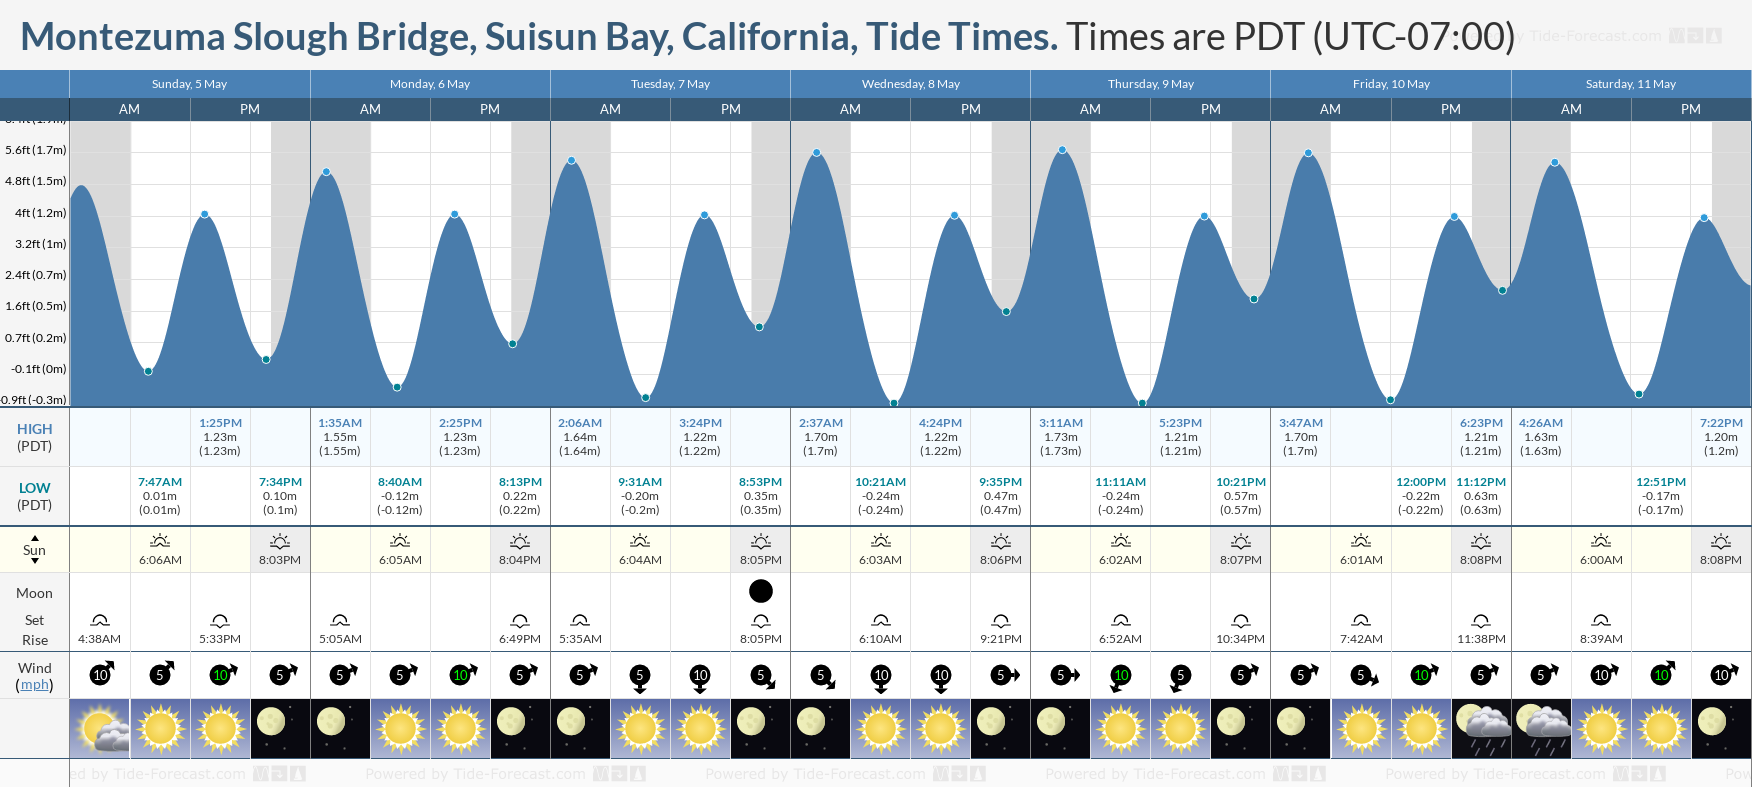 Montezuma Slough Bridge, Suisun Bay, California Tide Chart including high and low tide tide times for the next 7 days